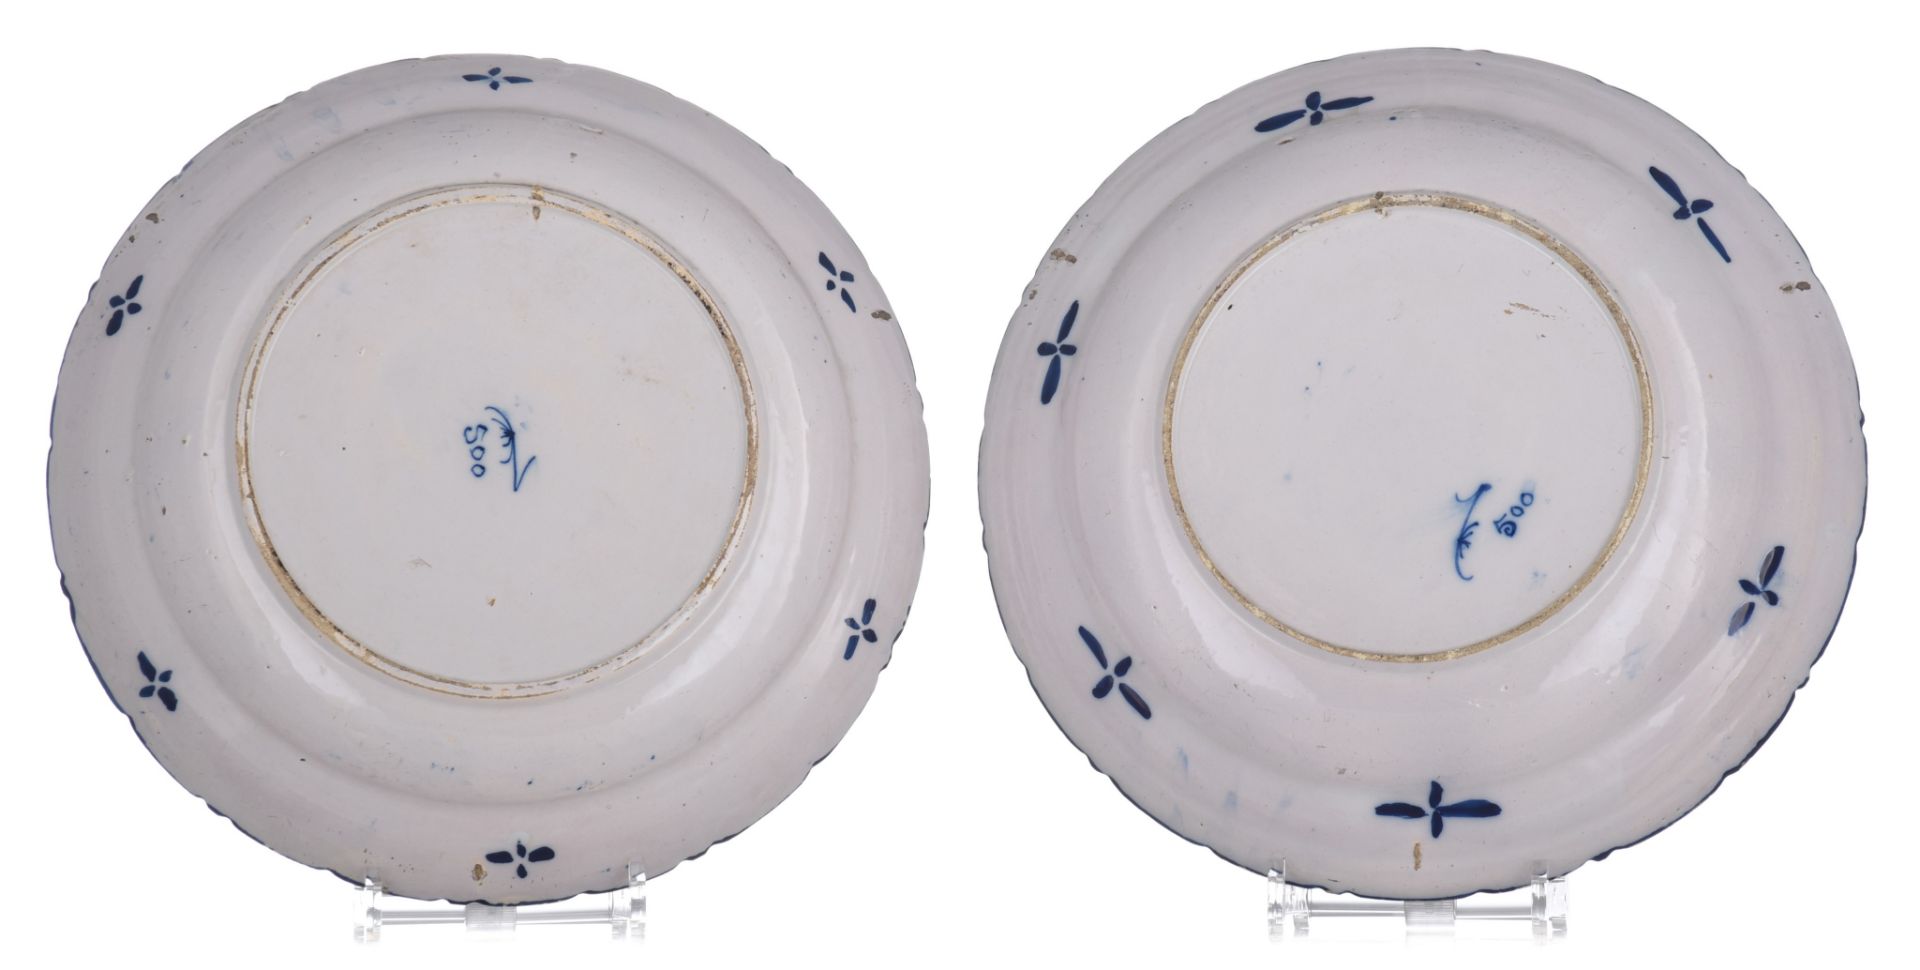 A collection of six Delft blue and white flower basket chargers, marked 'De Klauw', 18thC, ø 35 cm - Image 5 of 10